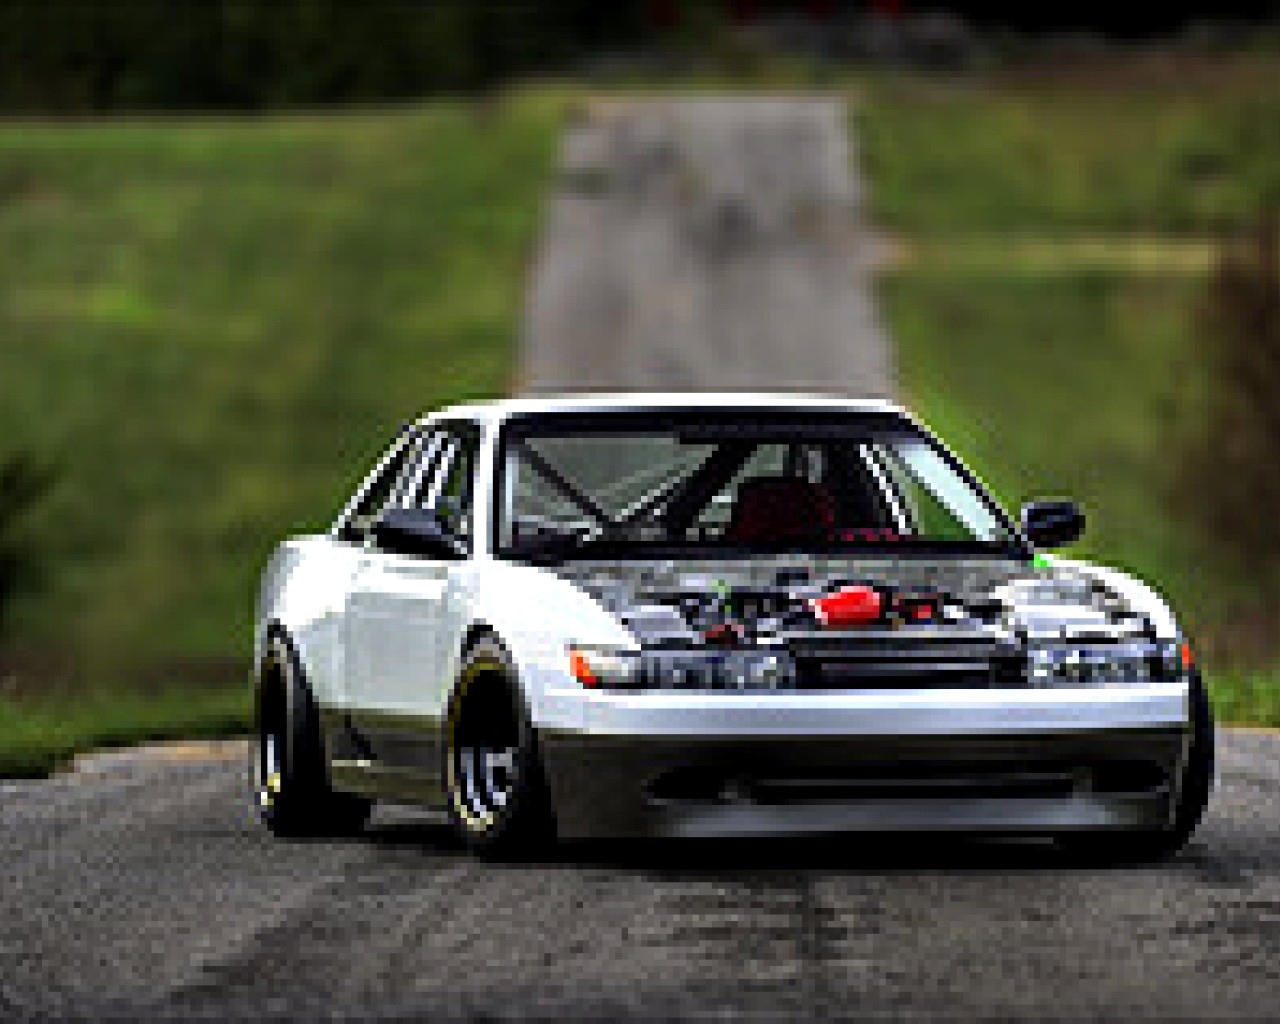 Gallery For Gt Nissan Silvia S13 Wallpaper